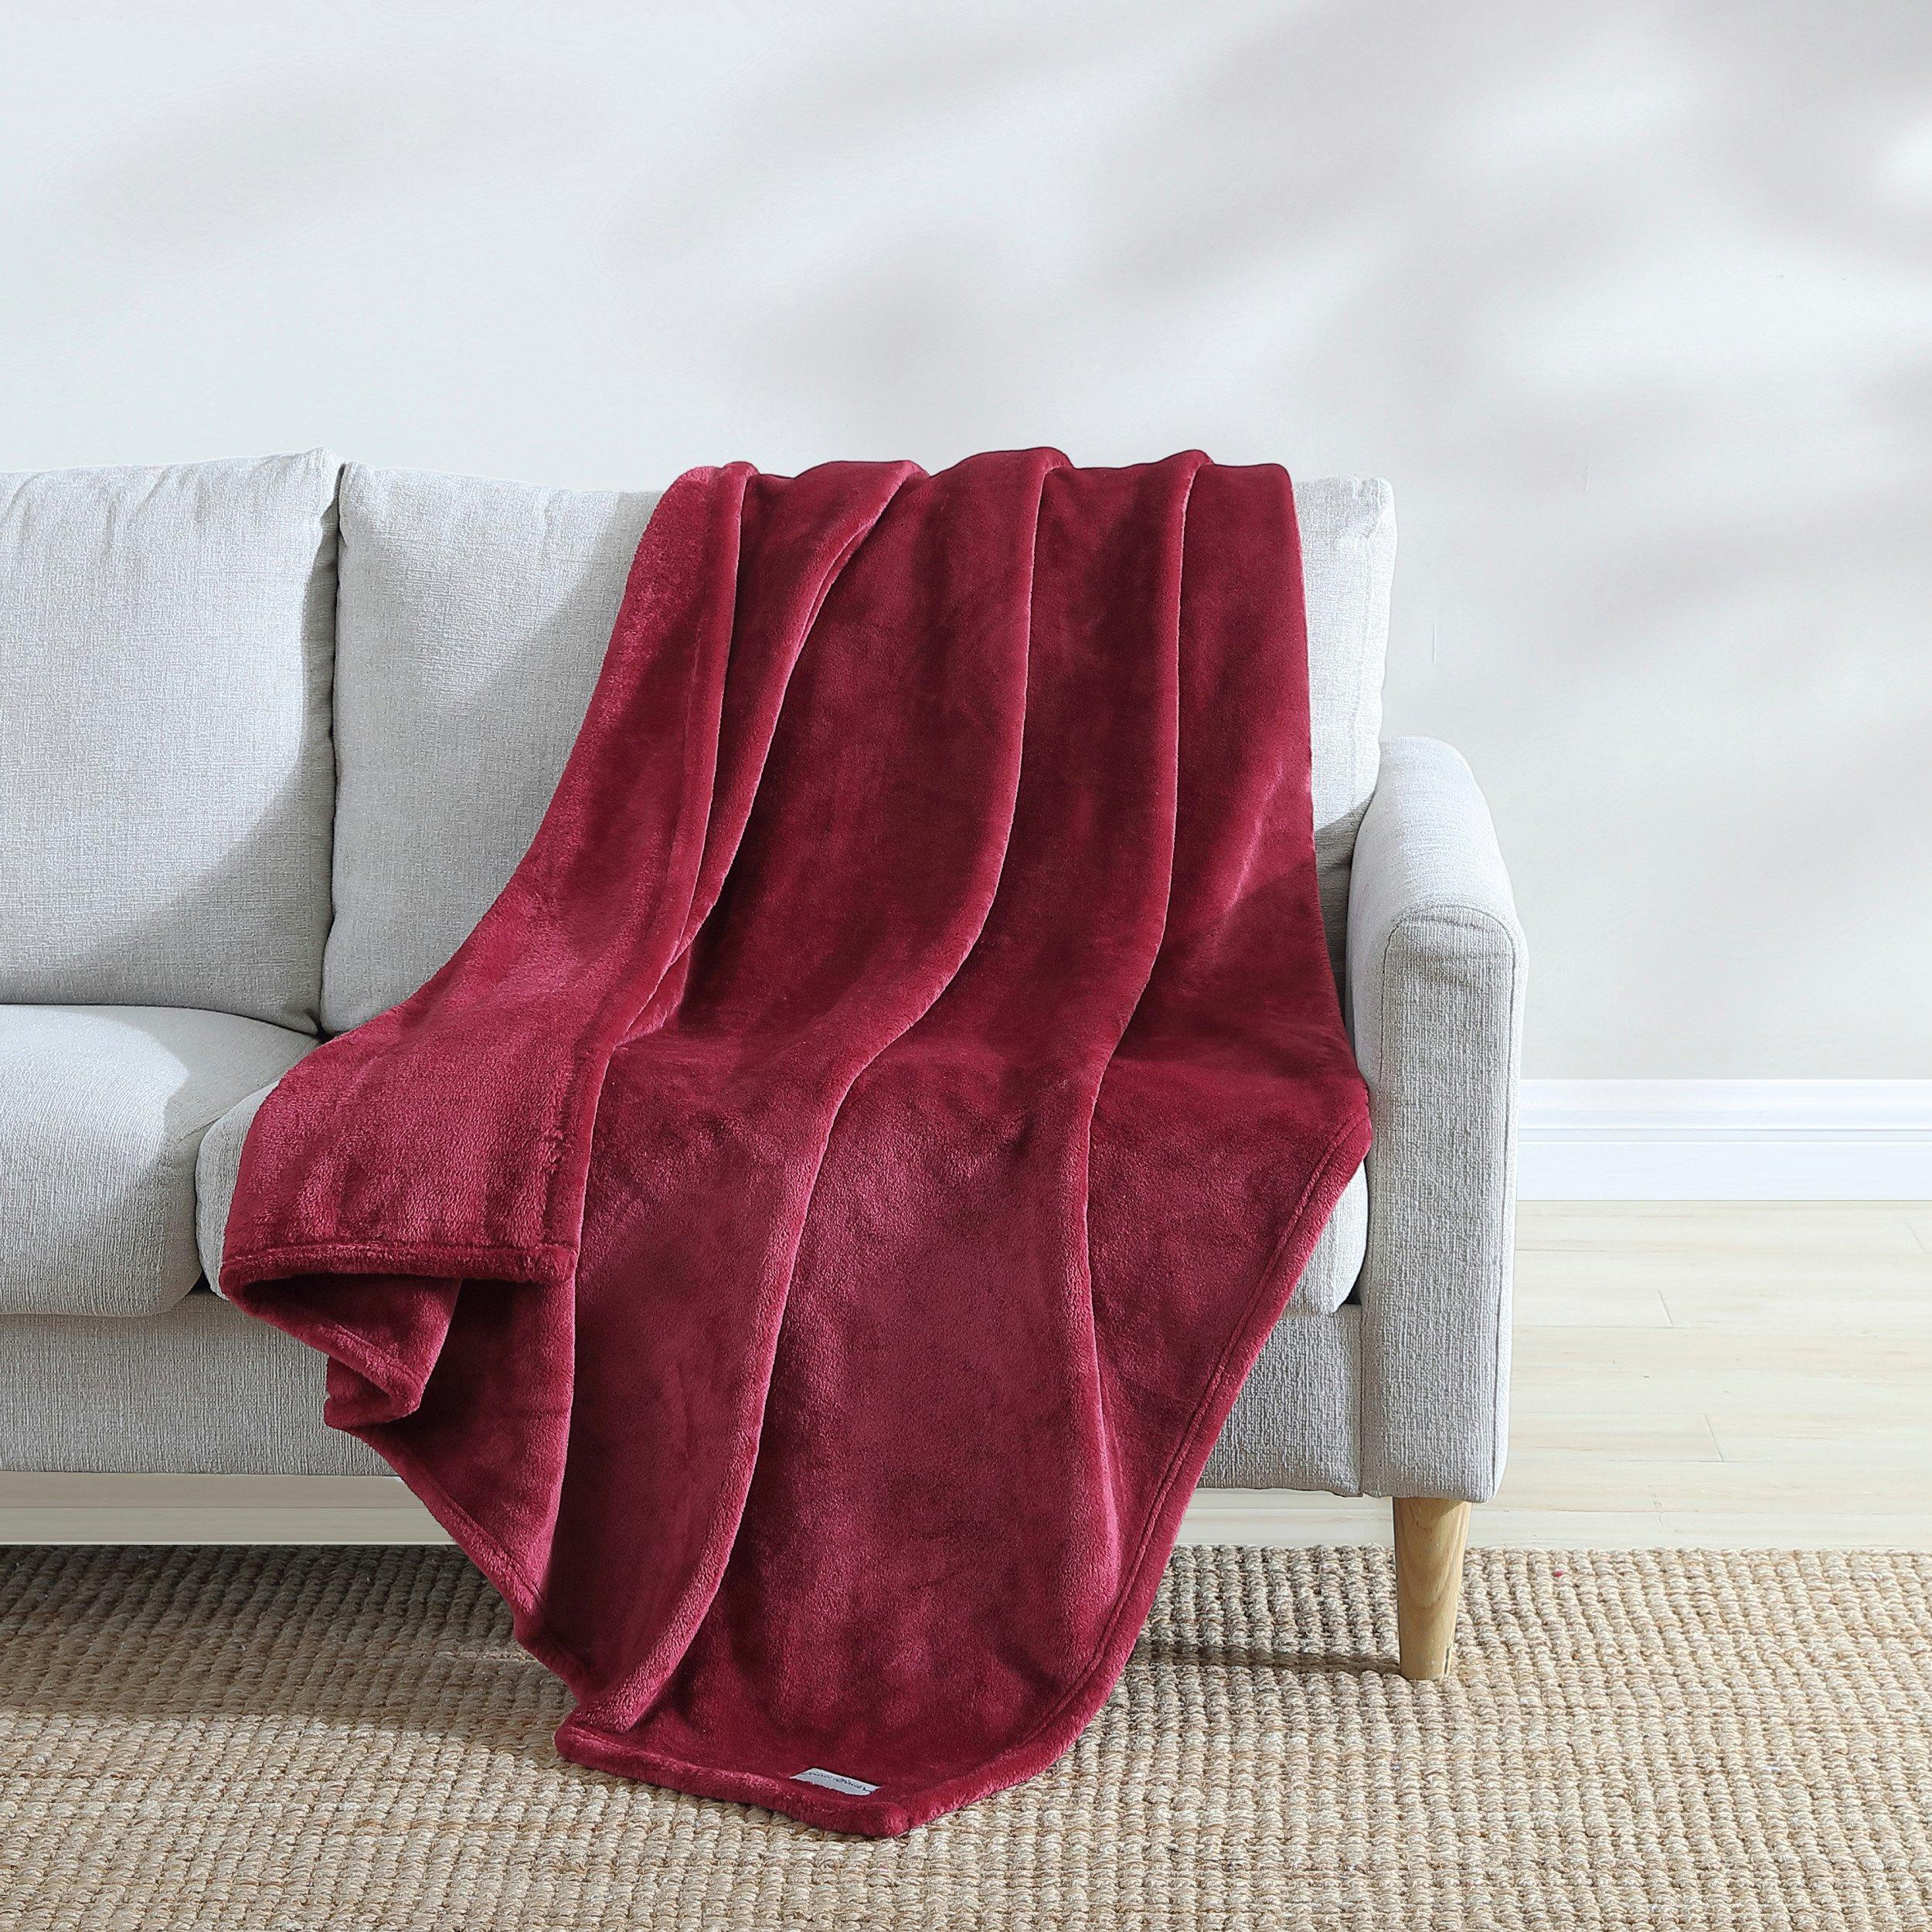 Photos - Other interior and decor Eddie Bauer Ultra Lux Plush Solid Reversible Throw Blanket 